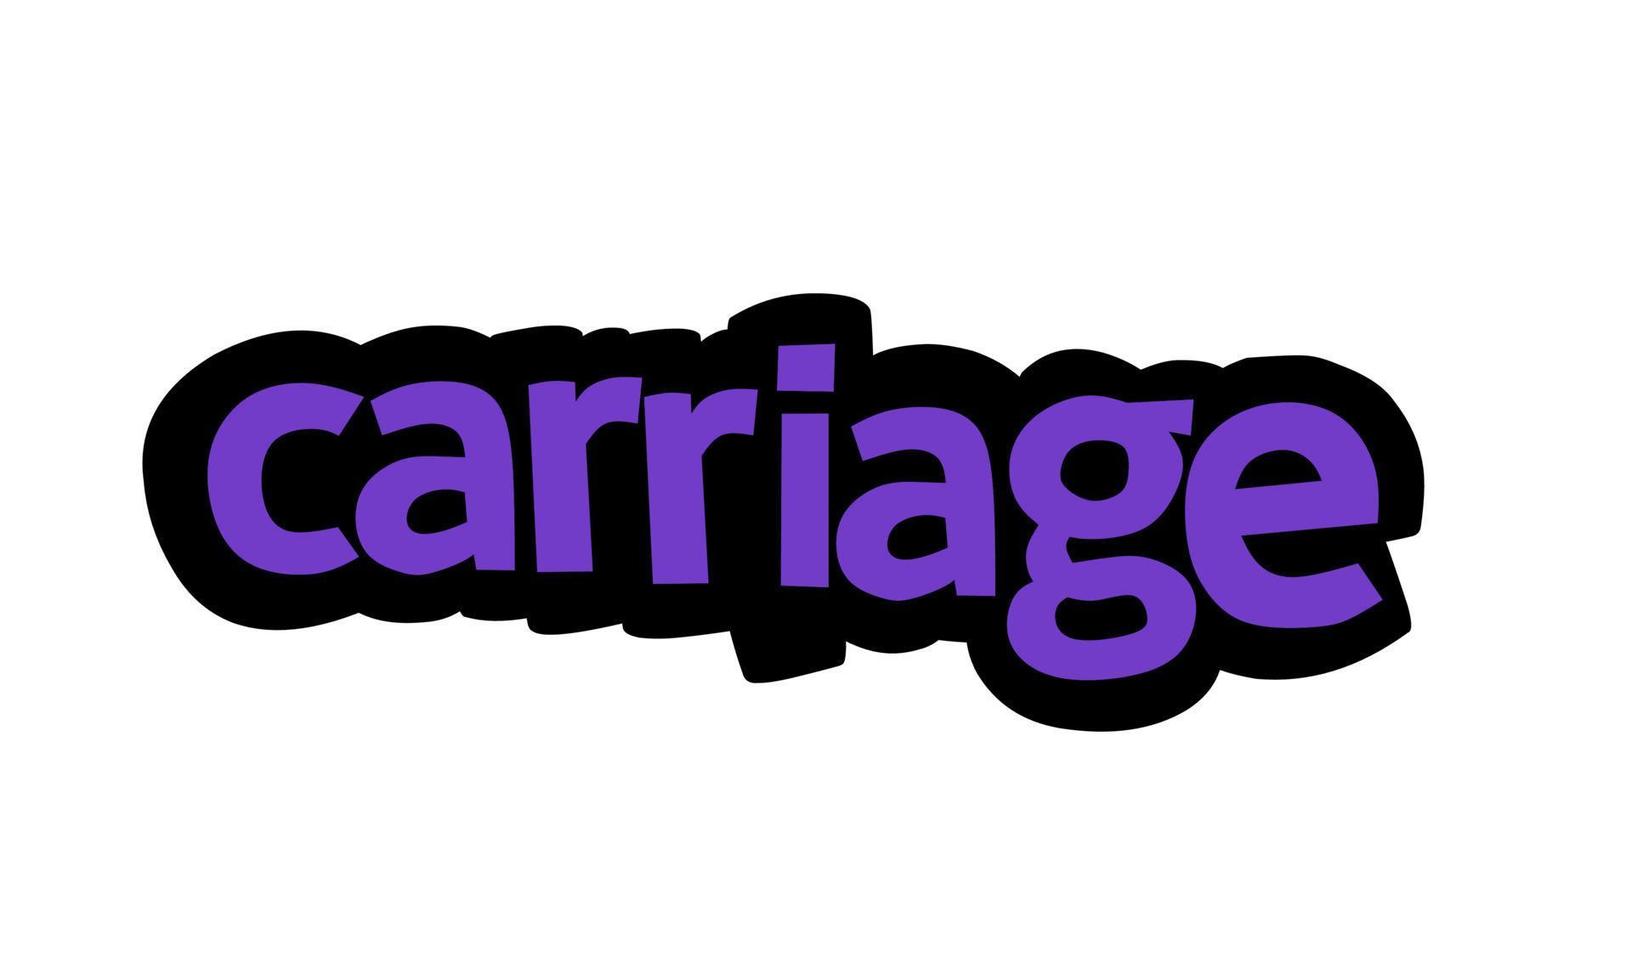 CARRIAGE writing vector design on white background